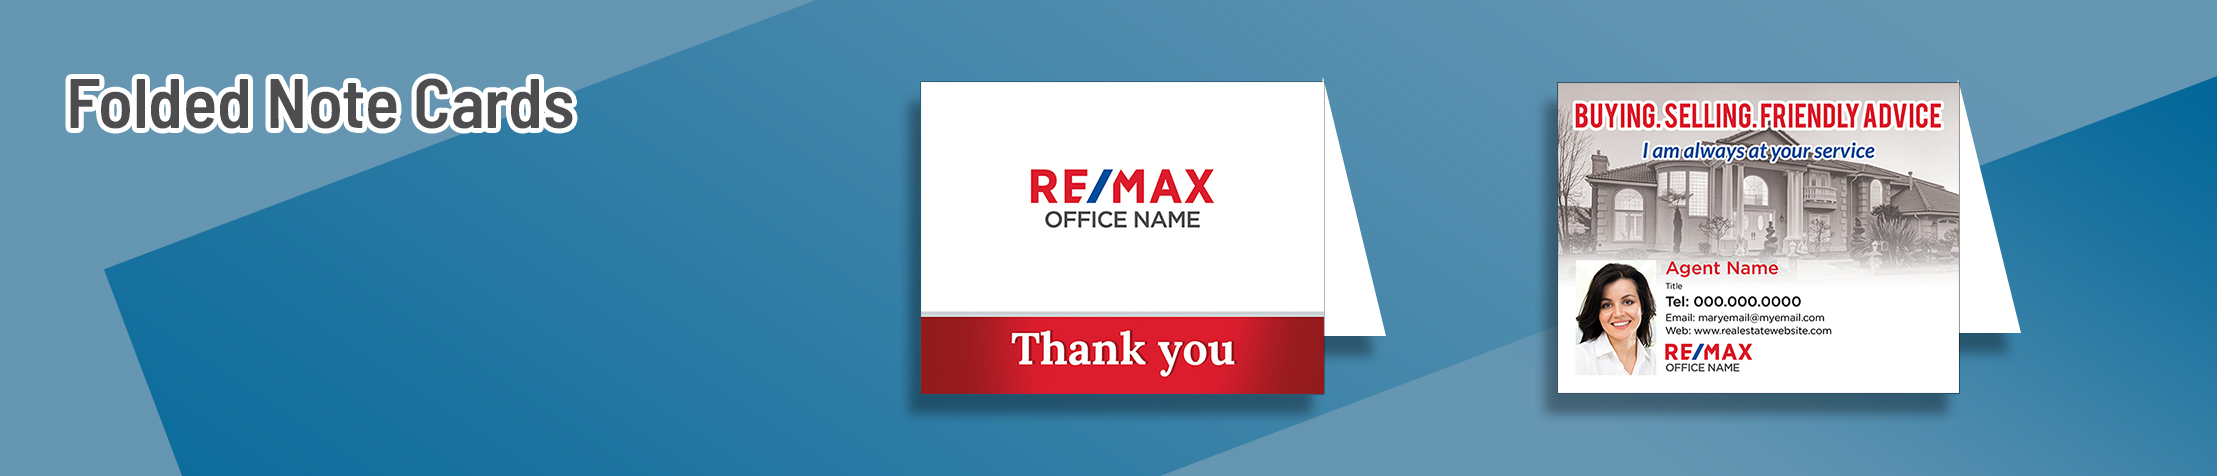 RE/MAX Real Estate Folded Note Cards - RE/MAX stationery | Sparkprint.com